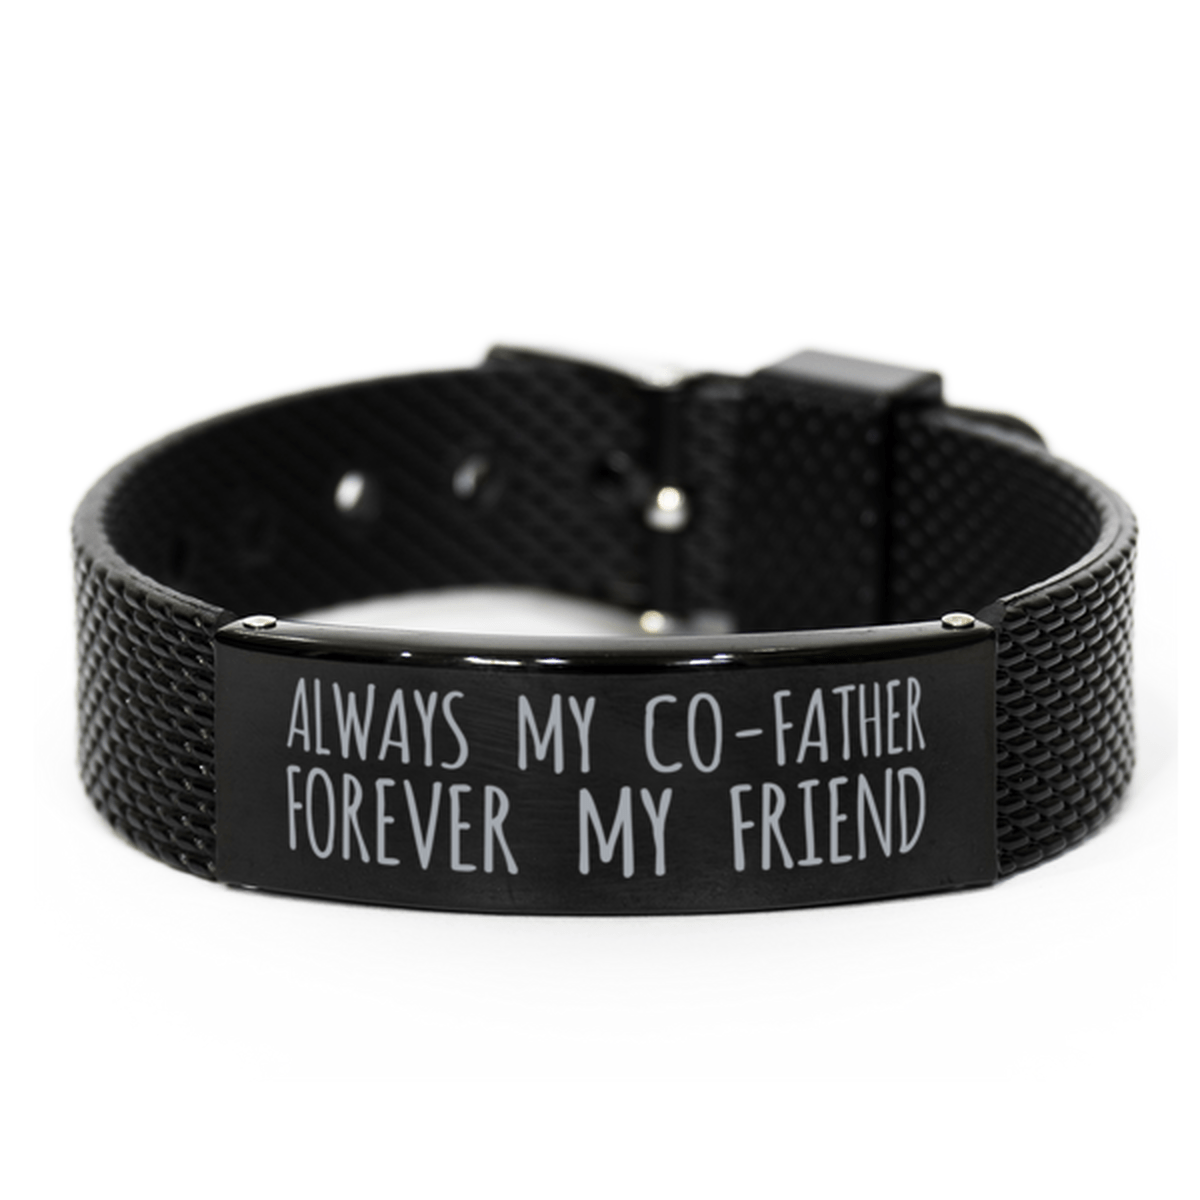 Inspirational Co-Father Black Shark Mesh Bracelet, Always My Co-Father Forever My Friend, Best Birthday Gifts for Family Friends